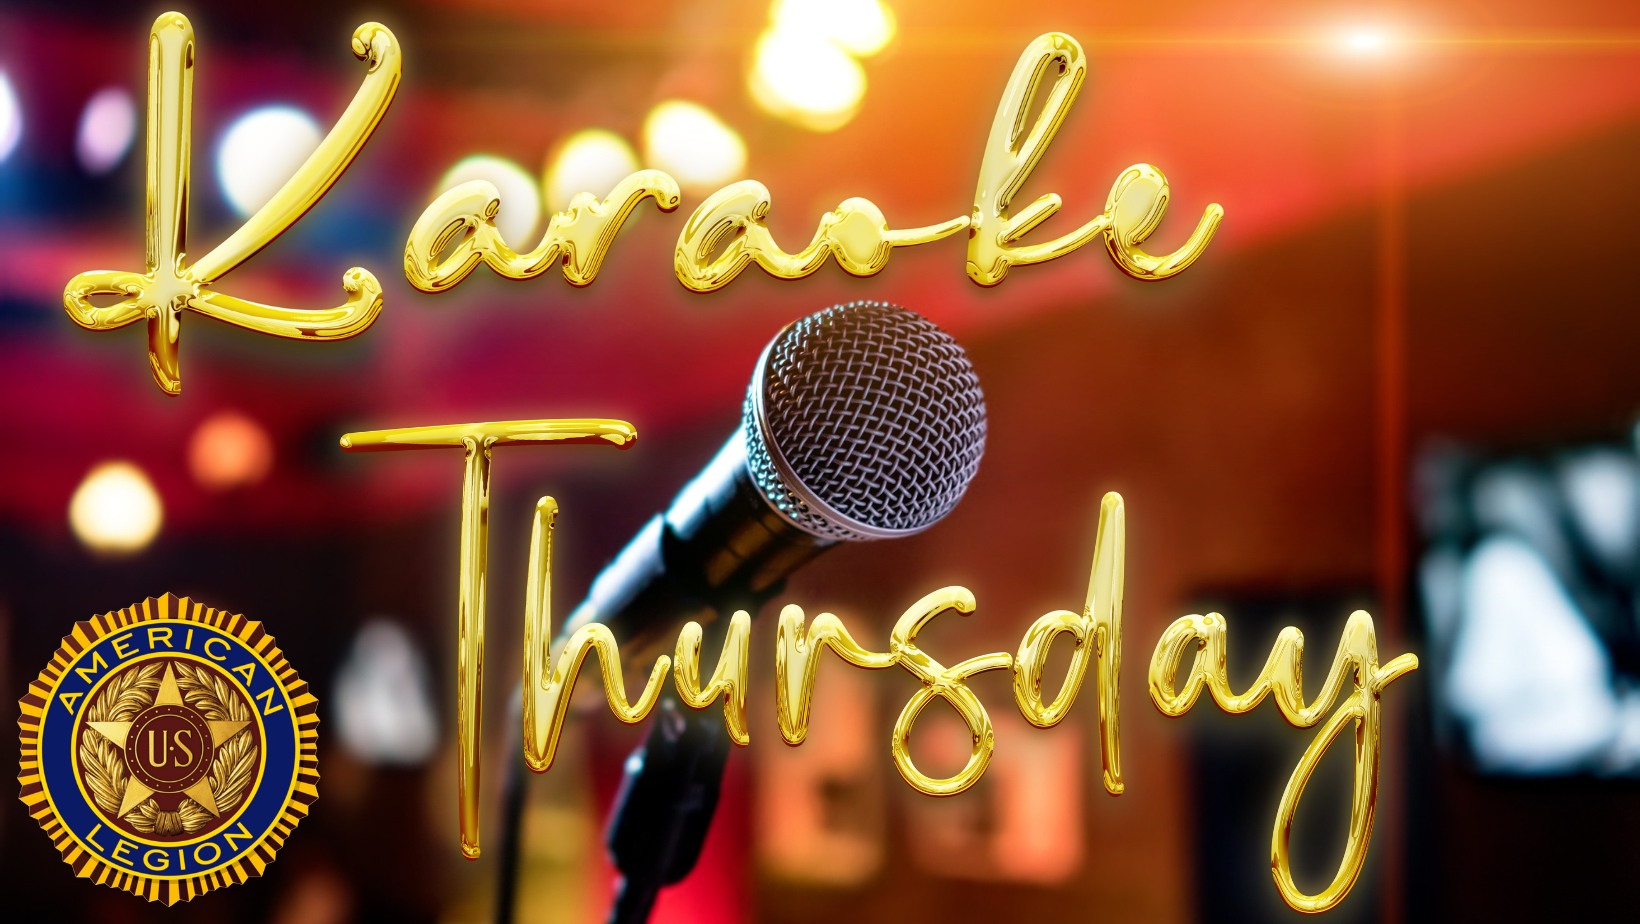 Karaoke every other Thursday at American Legion Post 129 in Paradise, Montana